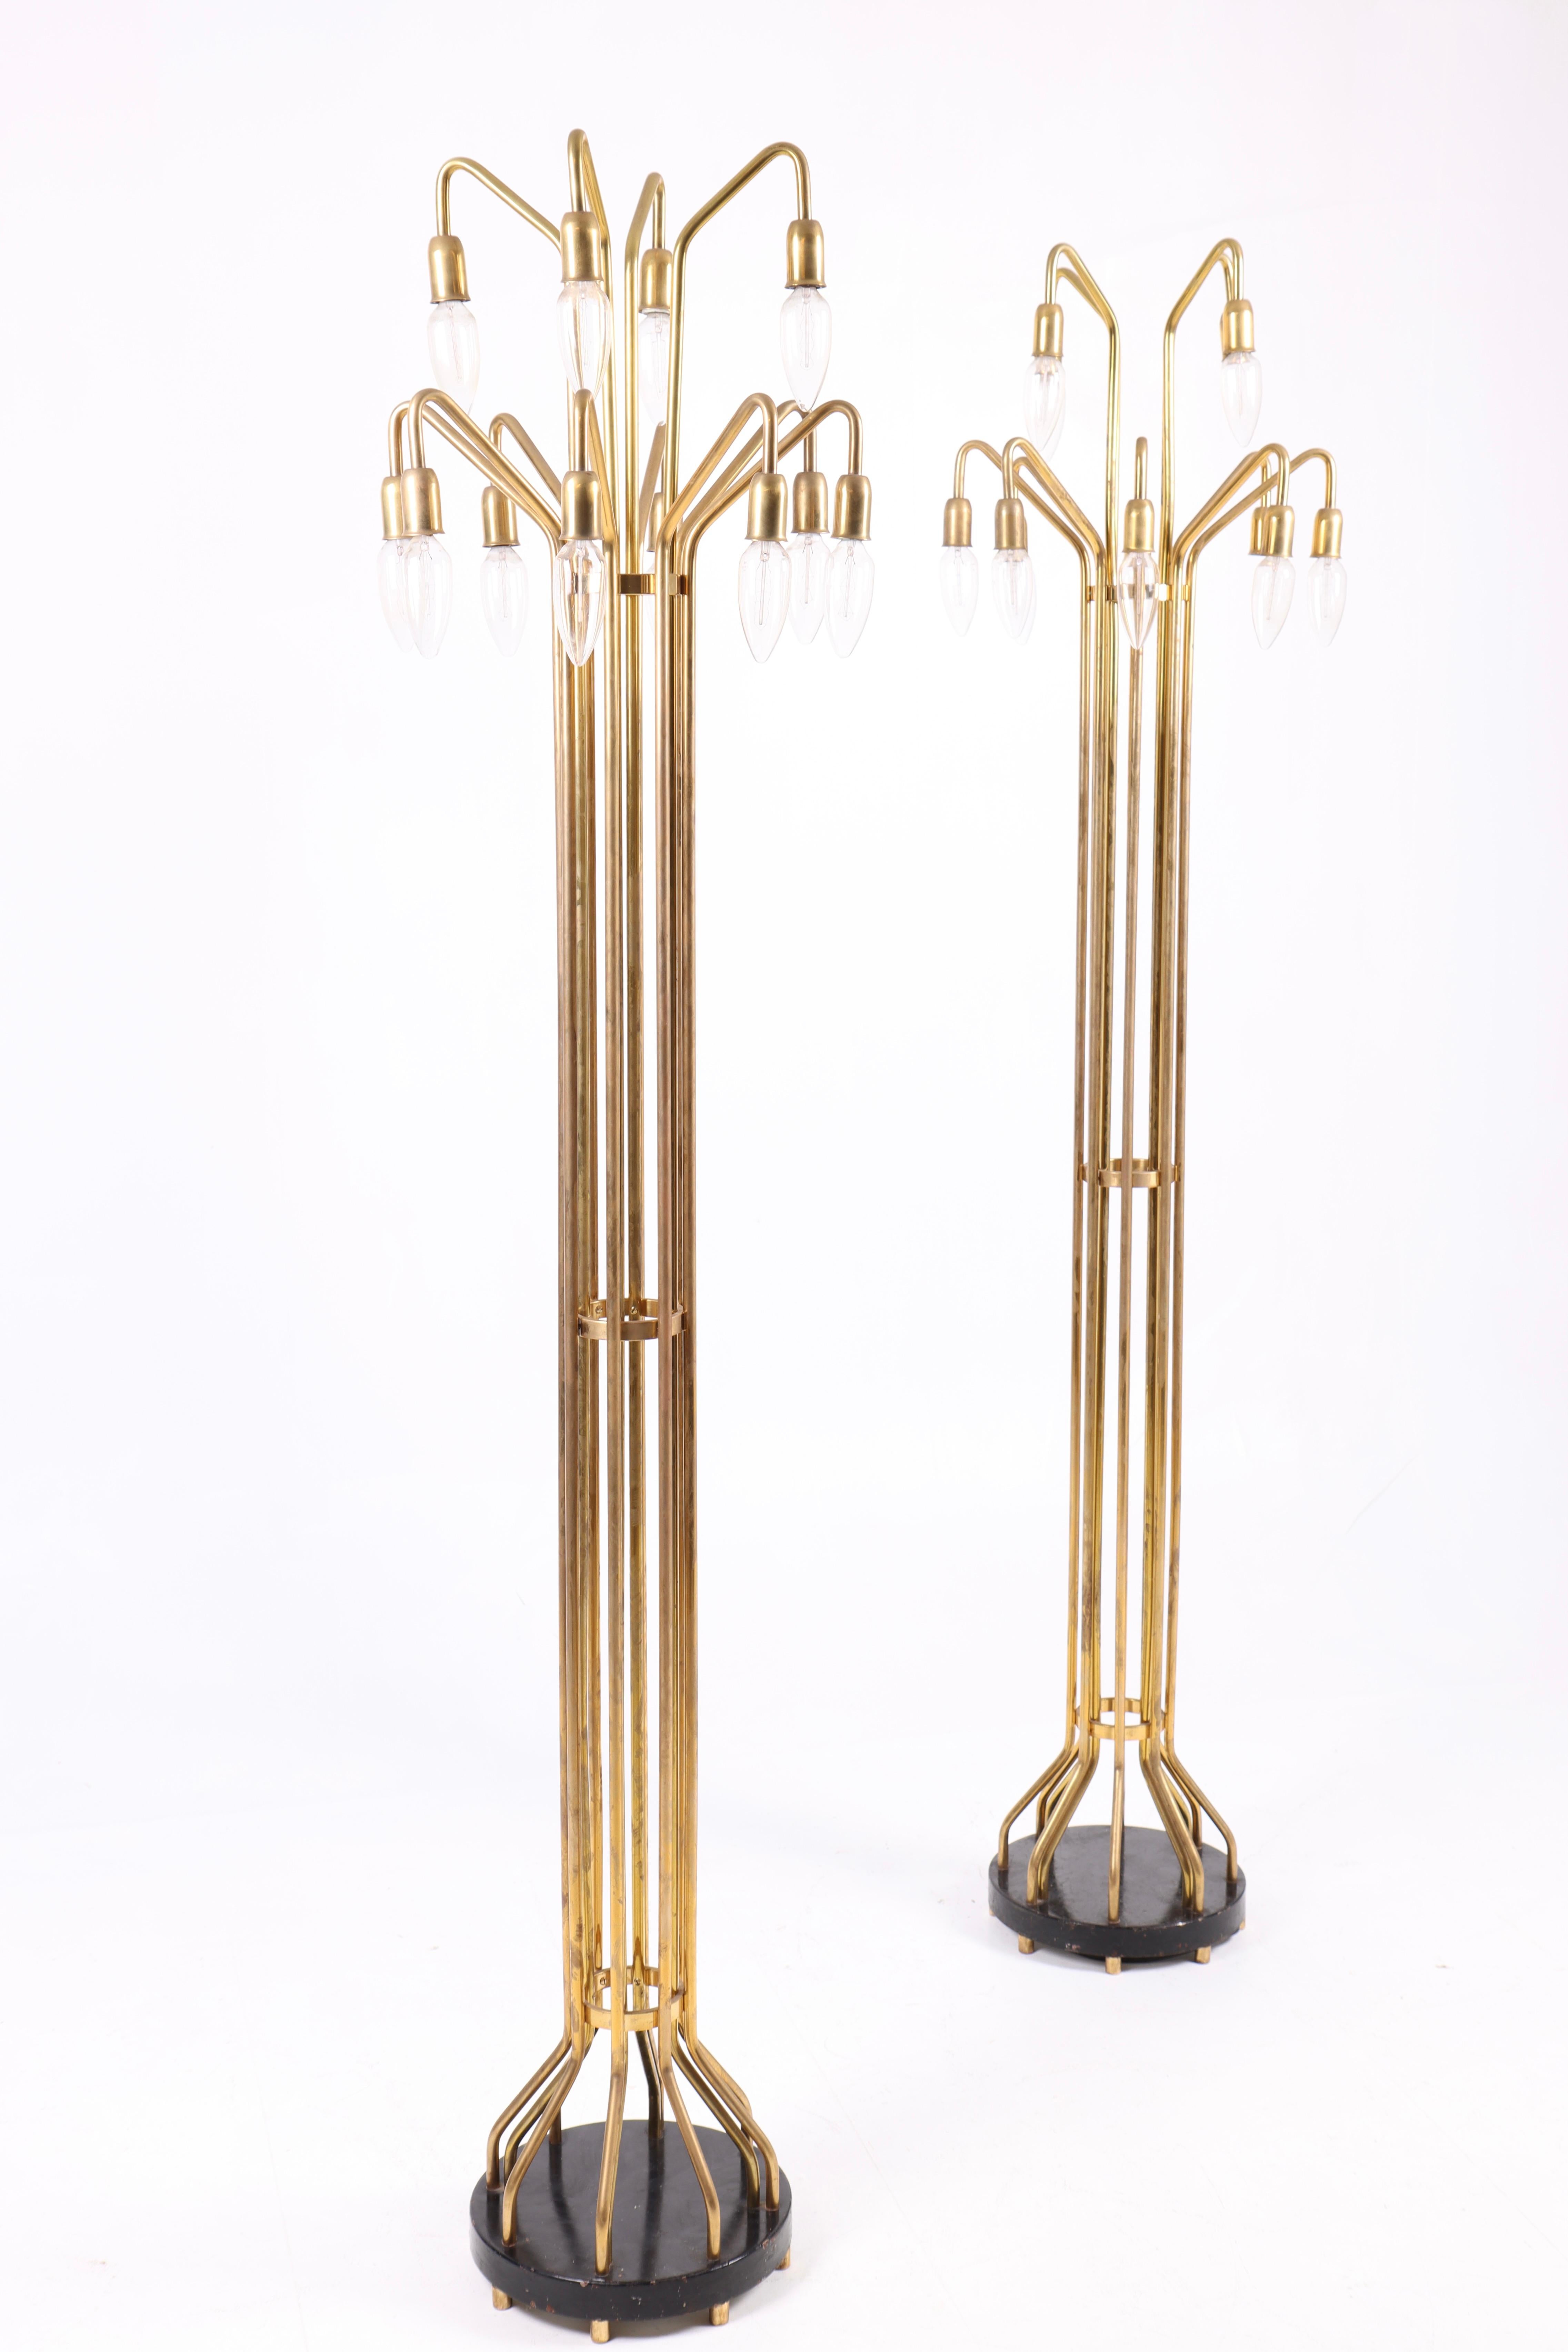 Danish Pair of Midcentury Floor Lamps in Patinated Brass, Made in Denmark, 1950s For Sale